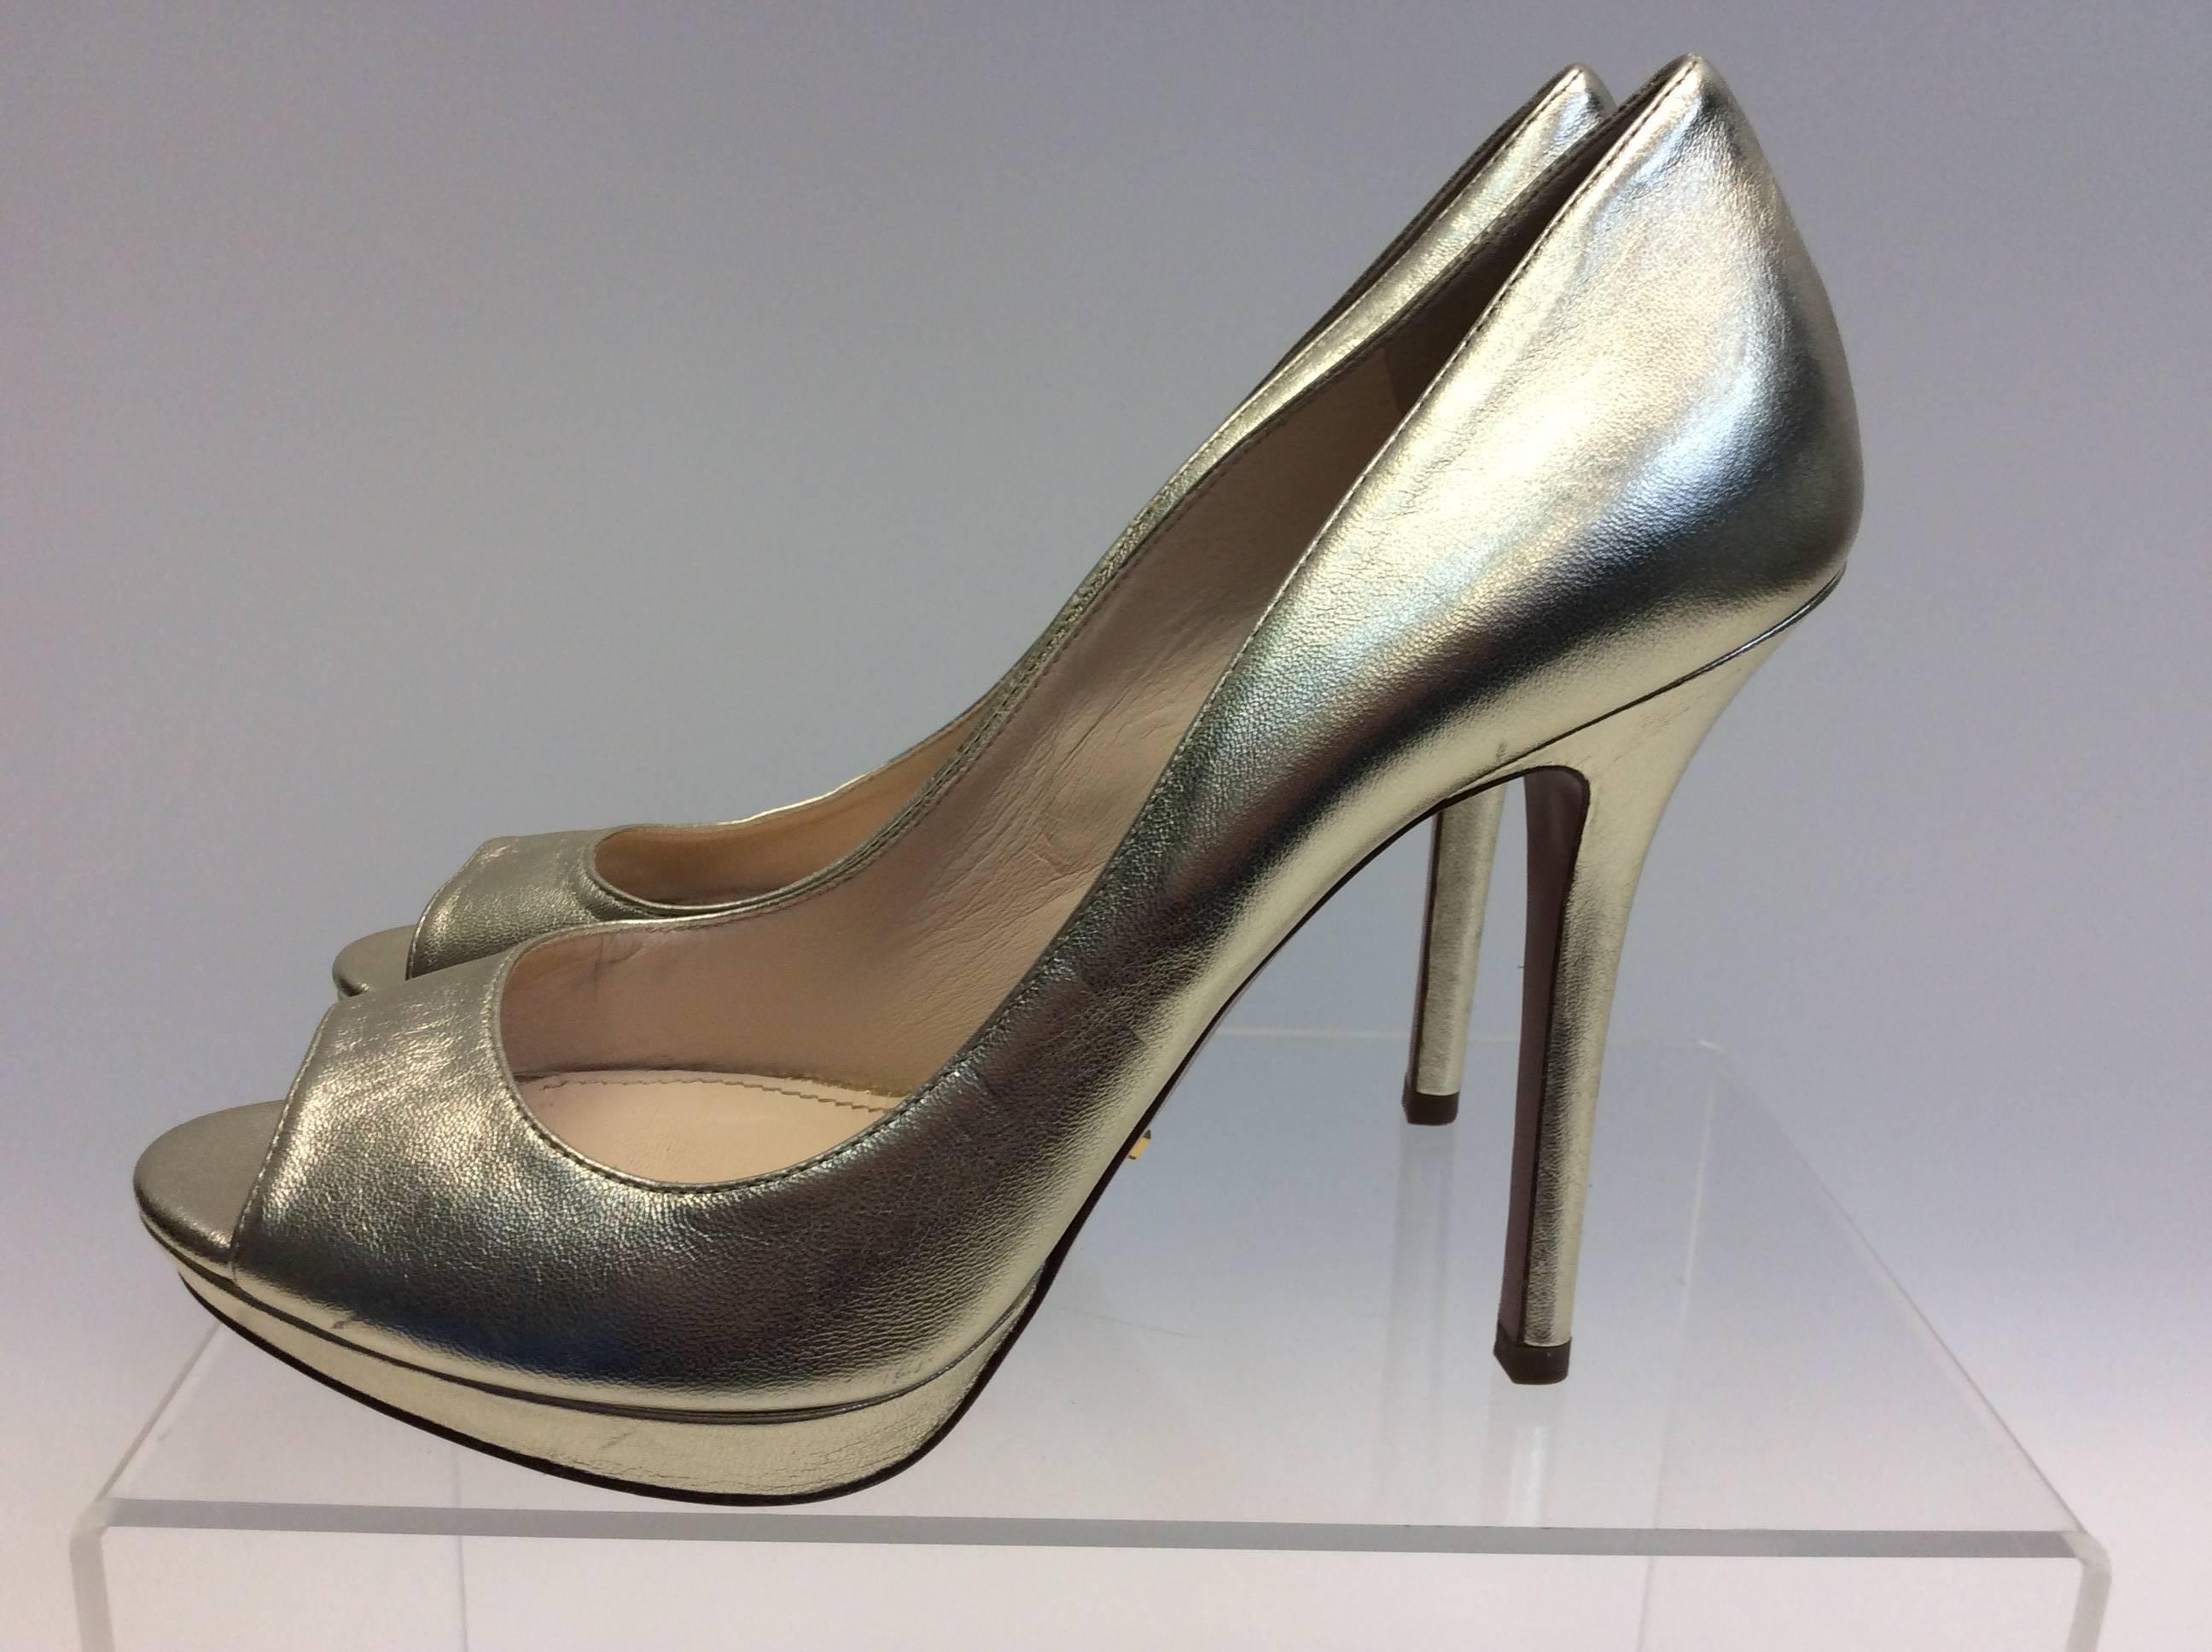 Prada Gold Leather Peep Toe Pump
$299
Made in Italy
Size 38.5
4.75